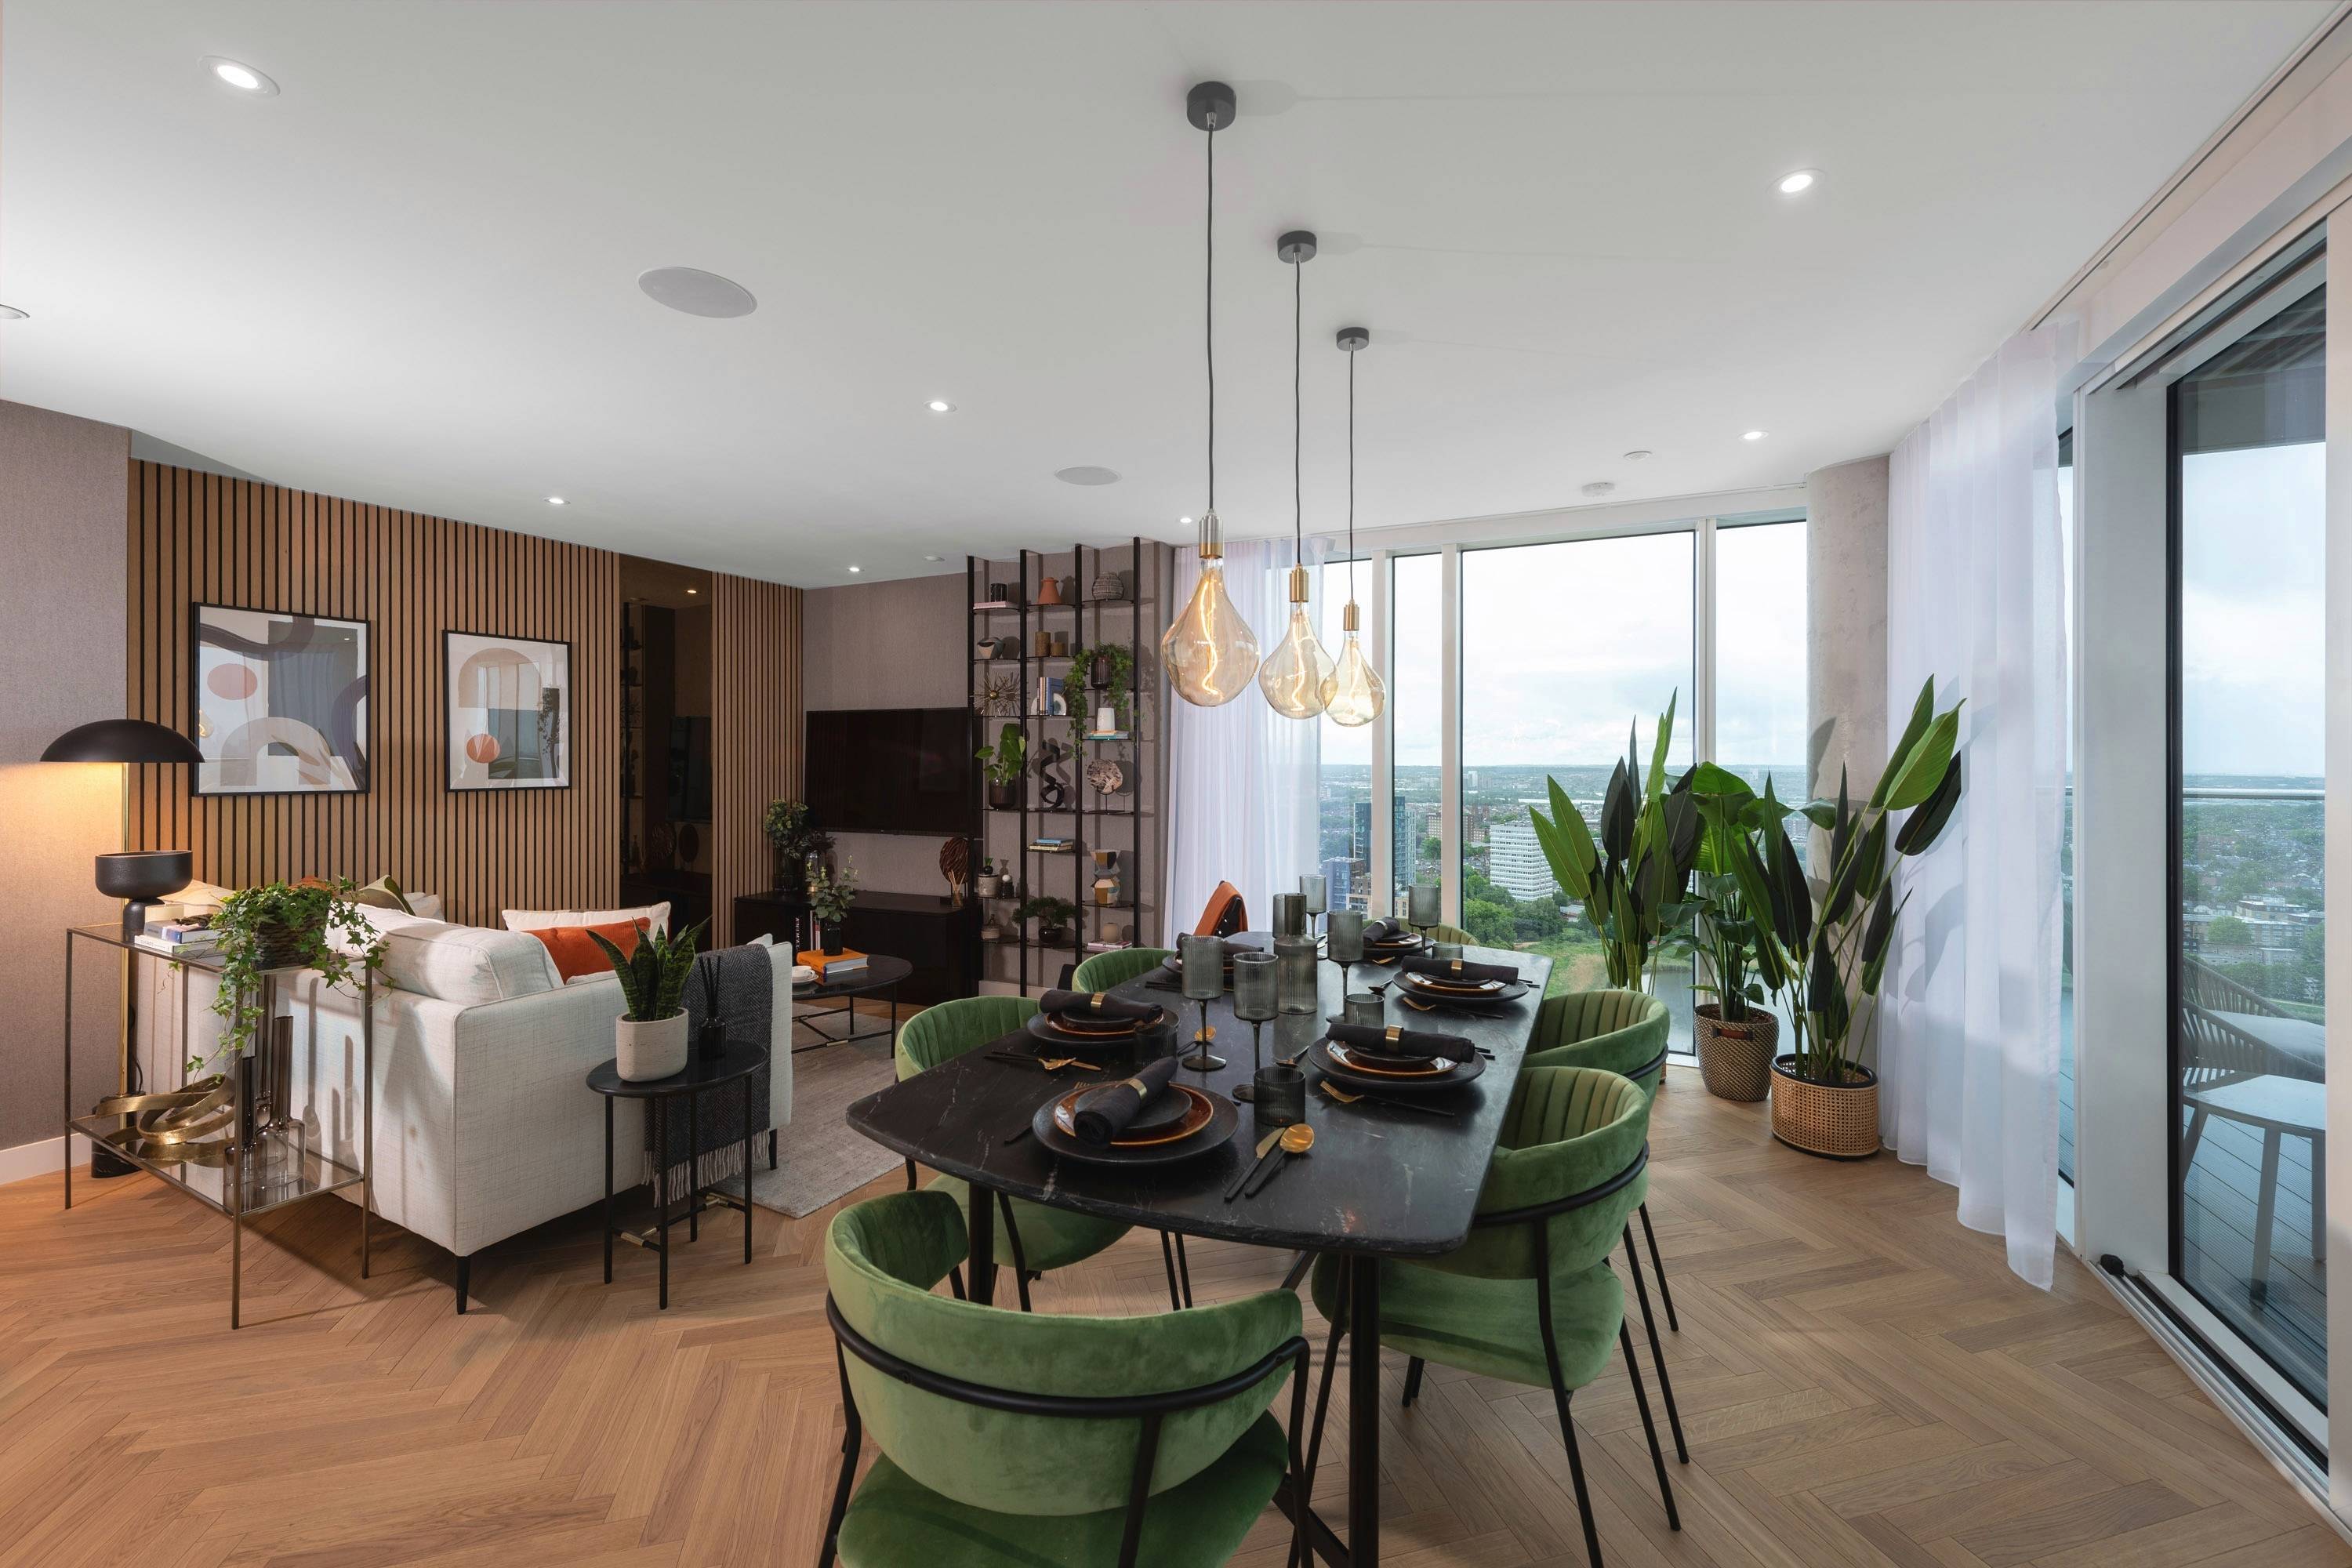 Hidden Oasis, 10 minutes from Central London -  Luxury 2-Bedroom Penthouse in a Stunning New Development Surrounded by Nature - Eighteenth Floor - Reservoirs and Garden Views